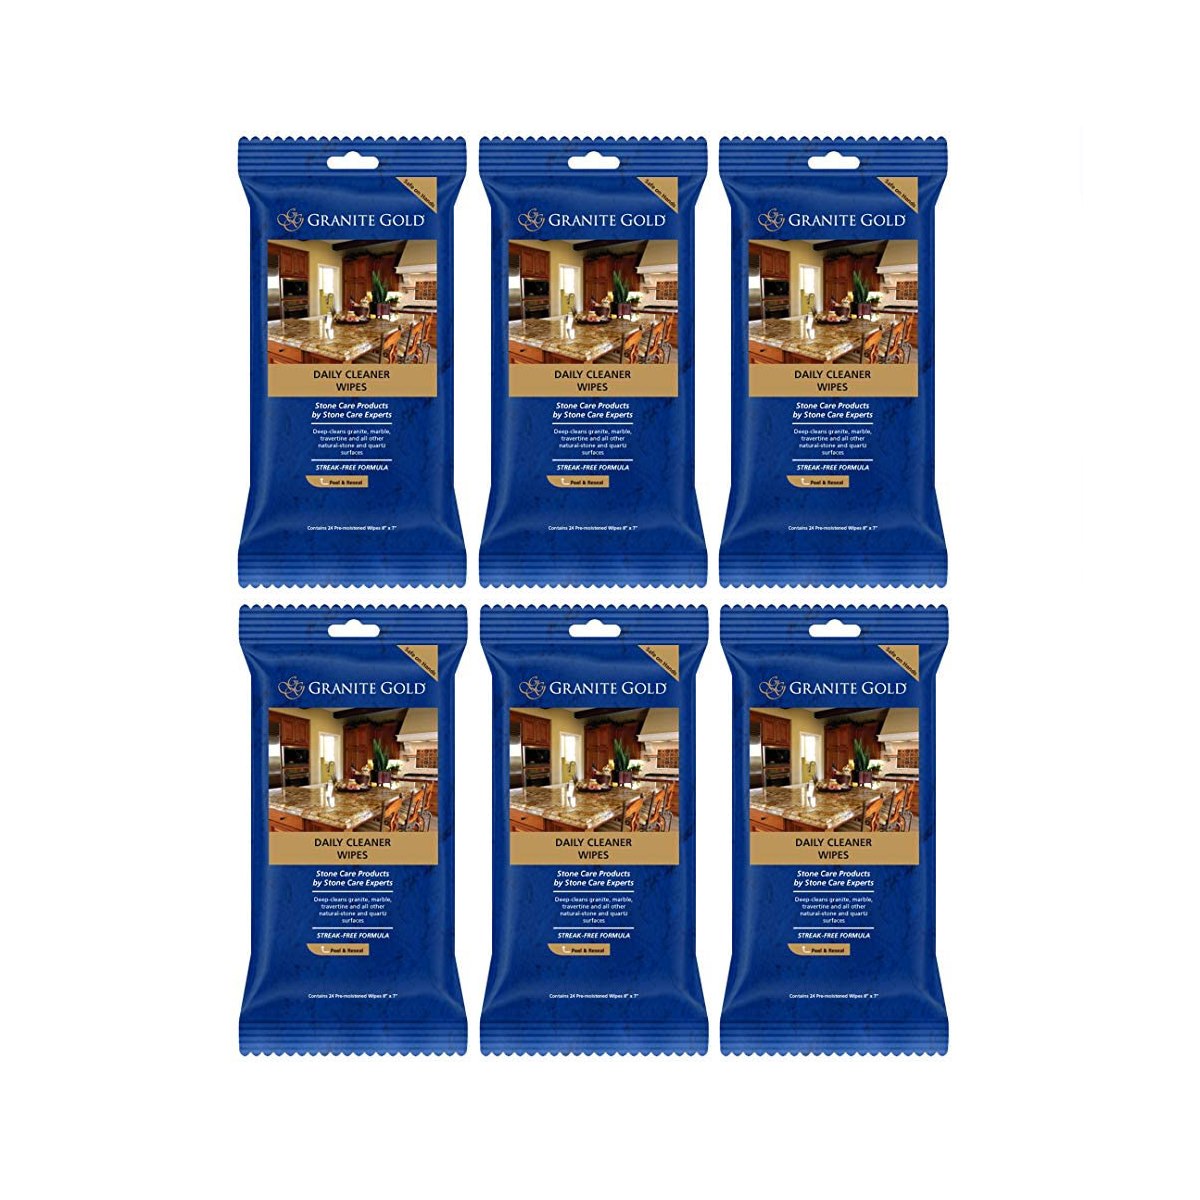 Case of 6 x Granite Gold Daily Cleaner Wipes Pack of 24 Wipes